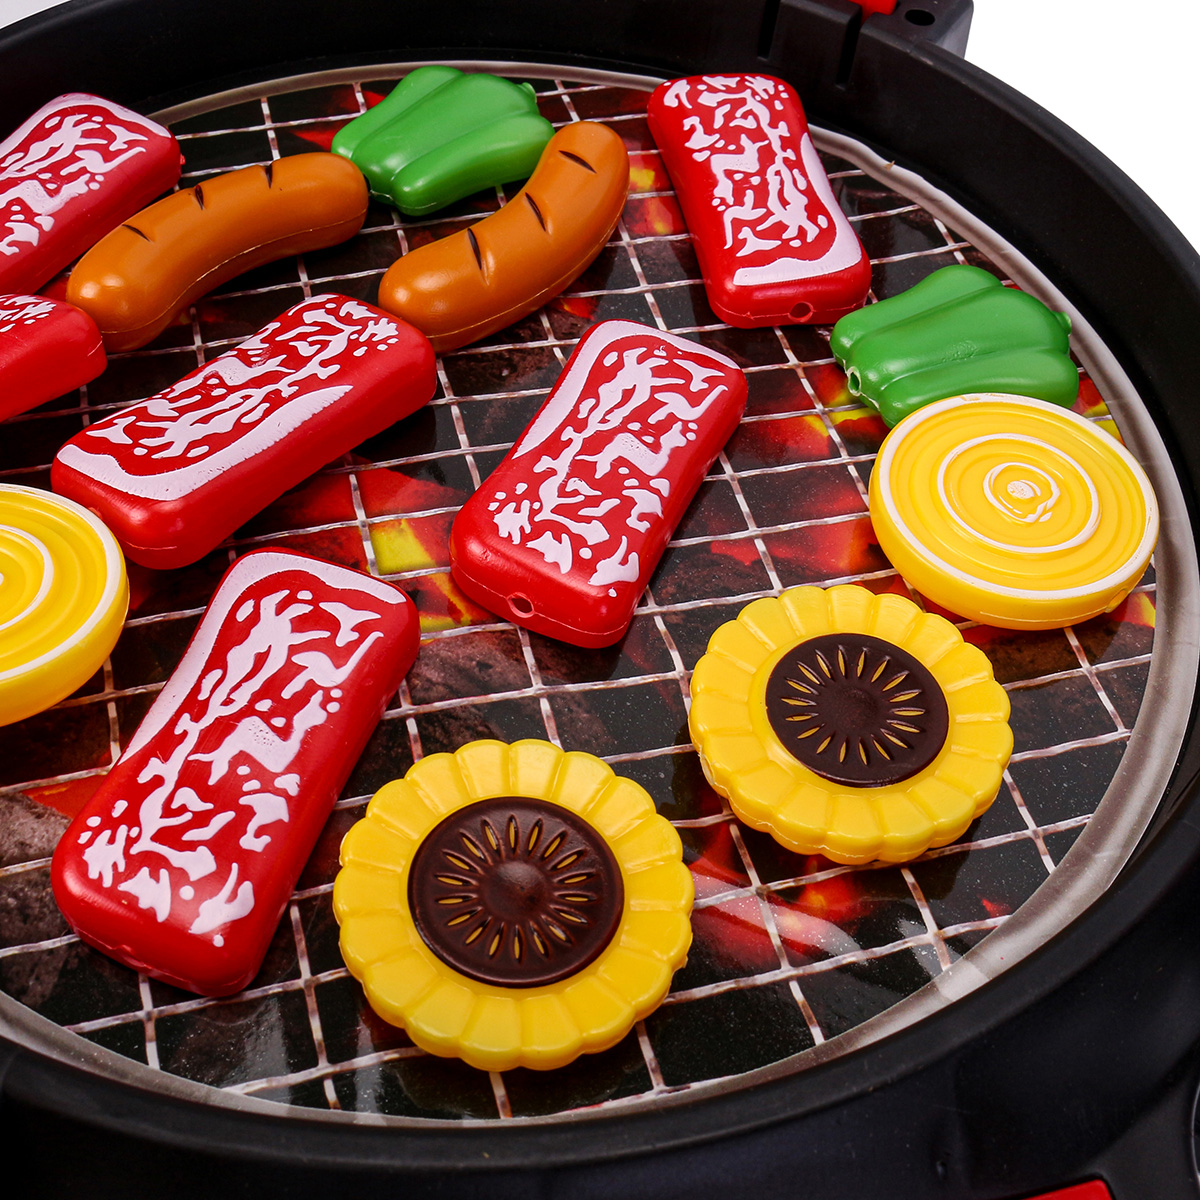 Kids-BBQ-Grill-Pretend-Play-Toys-Kitchen-Barbecue-Food-Cooking-Set-Children-Gift-1624893